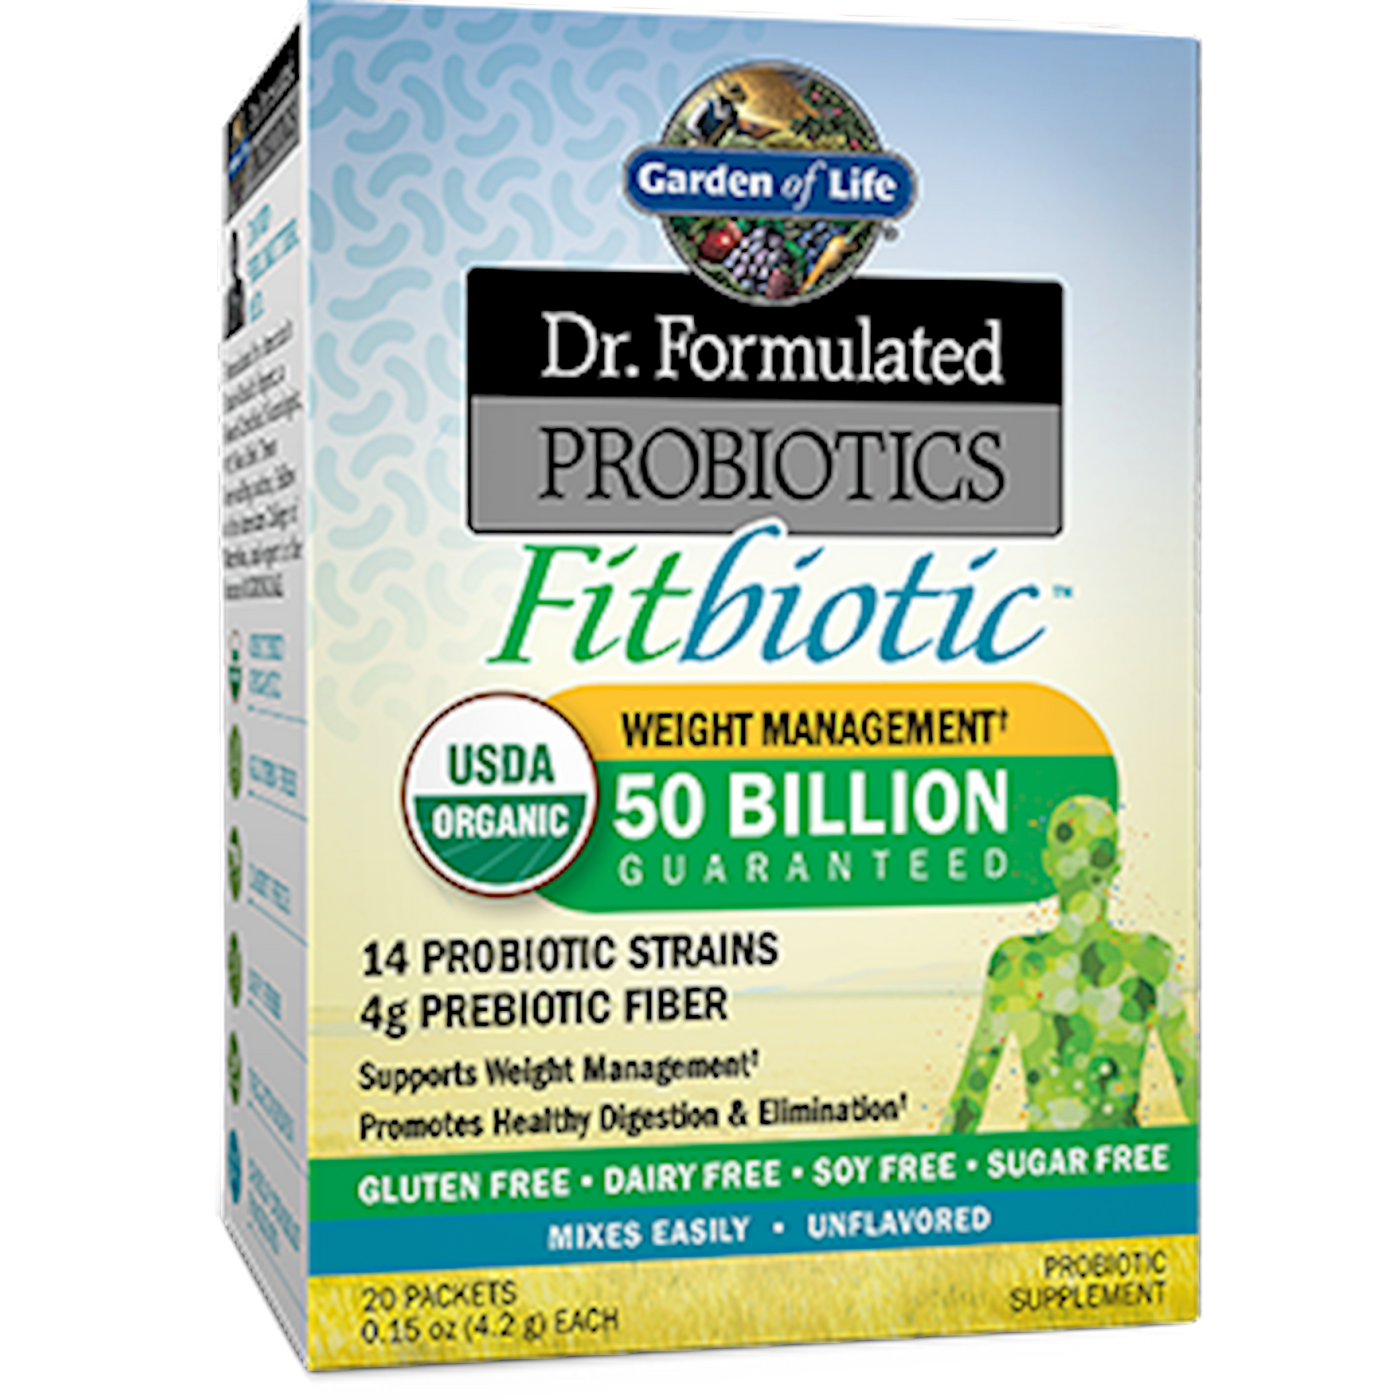 Dr. Formulated Fitbiotic s Curated Wellness